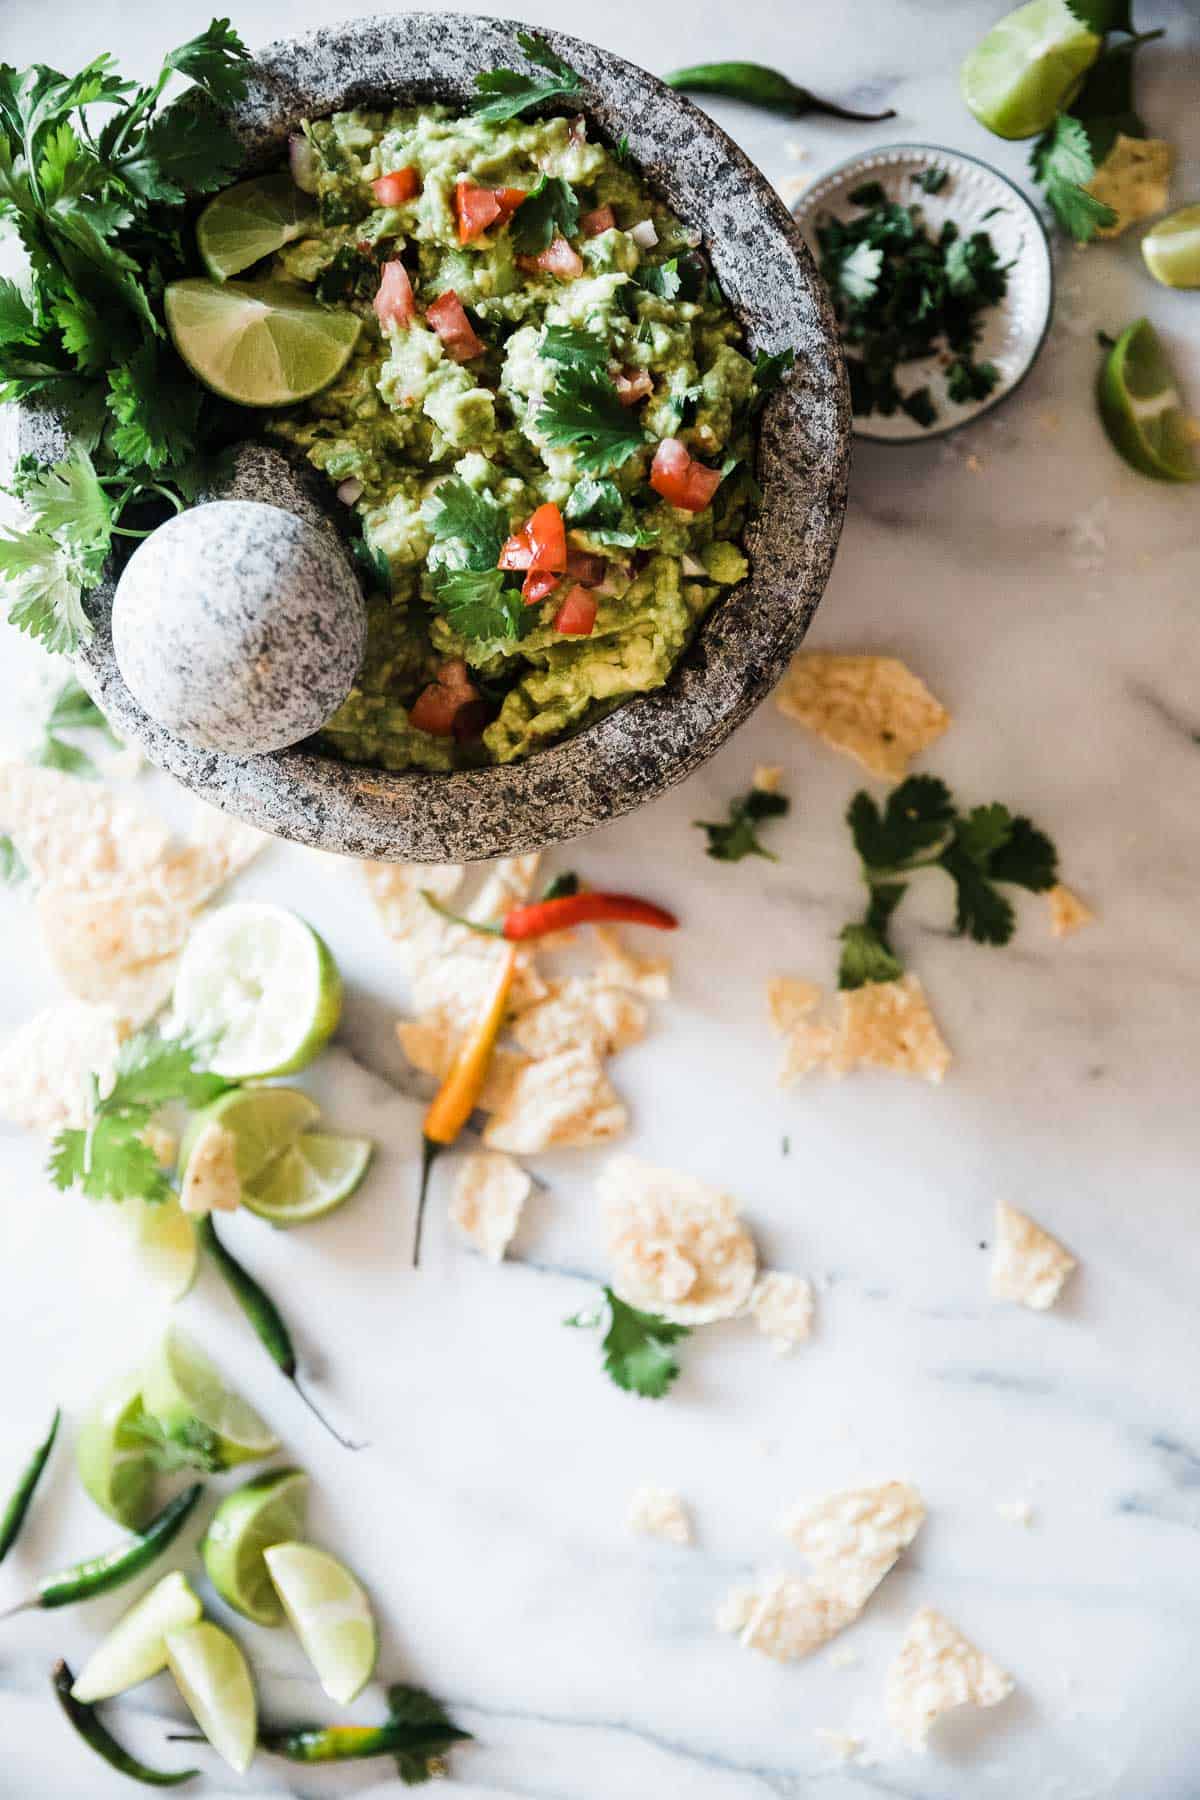 Homemade guacamole recipe in a grey bowl. It is surrounded by chips and peppers.